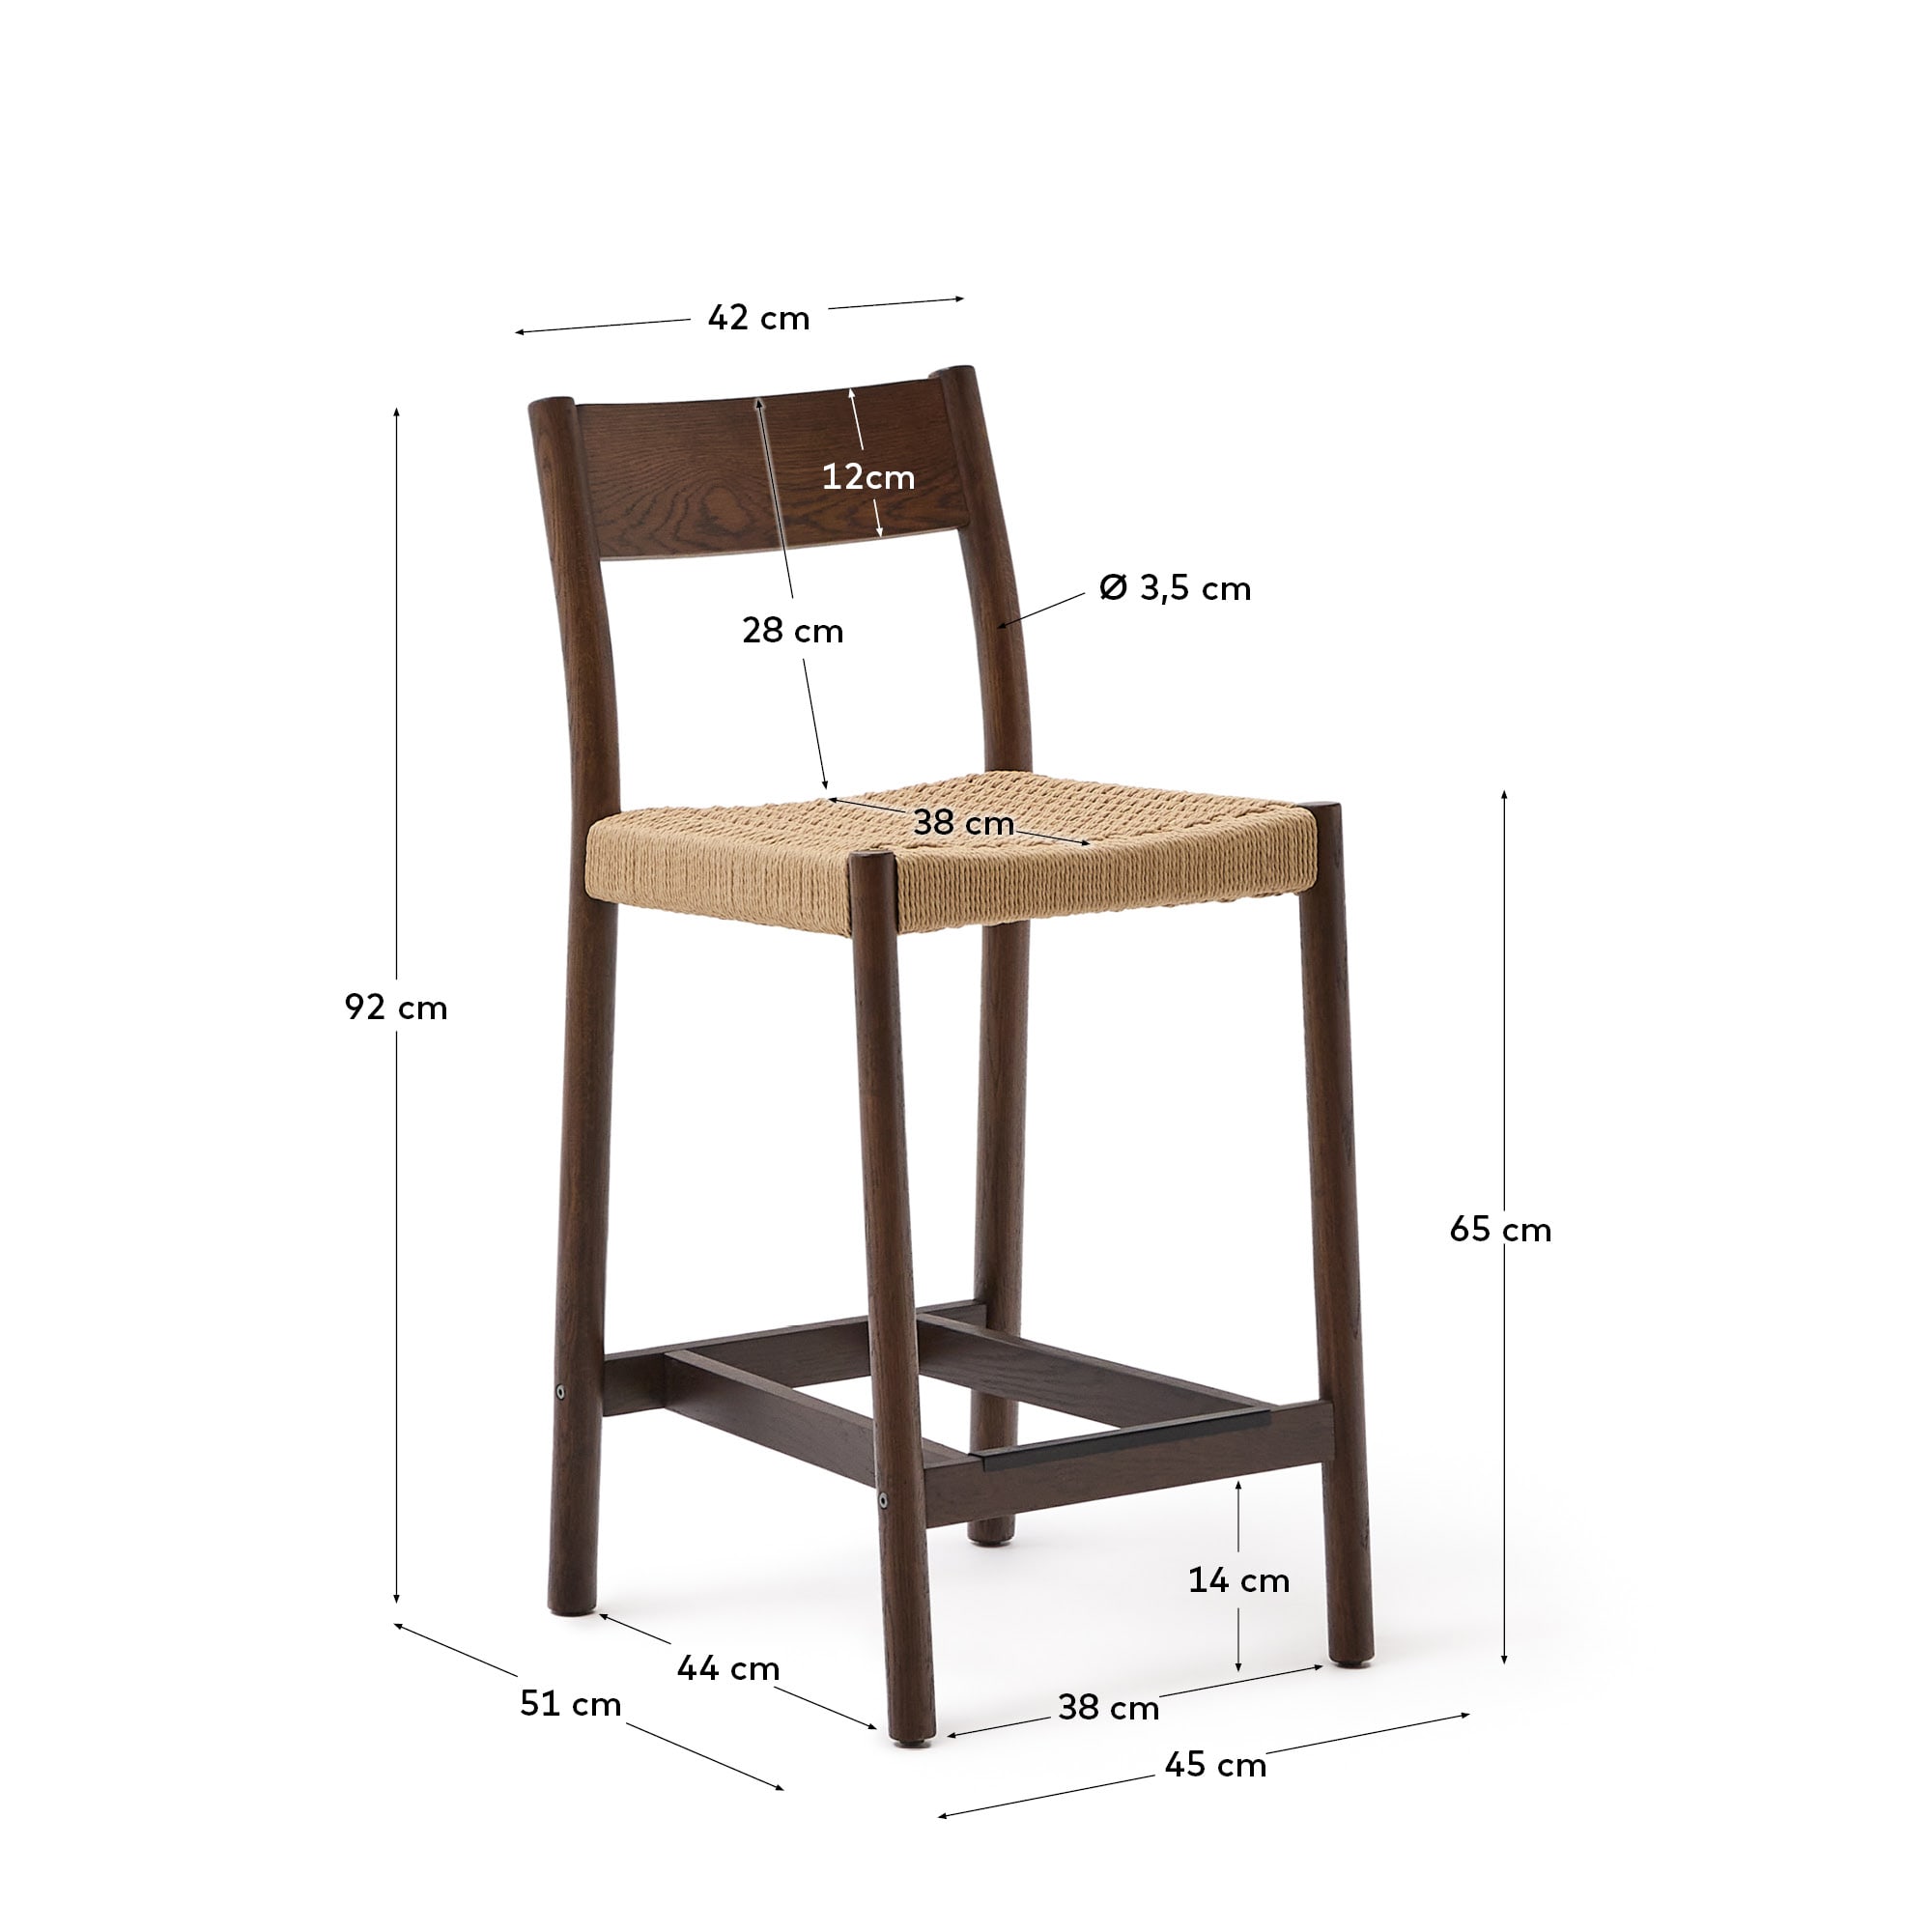 Yalia stool with a backrest in solid oak wood in a walnut finish, and rope cord seat, 65 cm 100% FSC - 크기